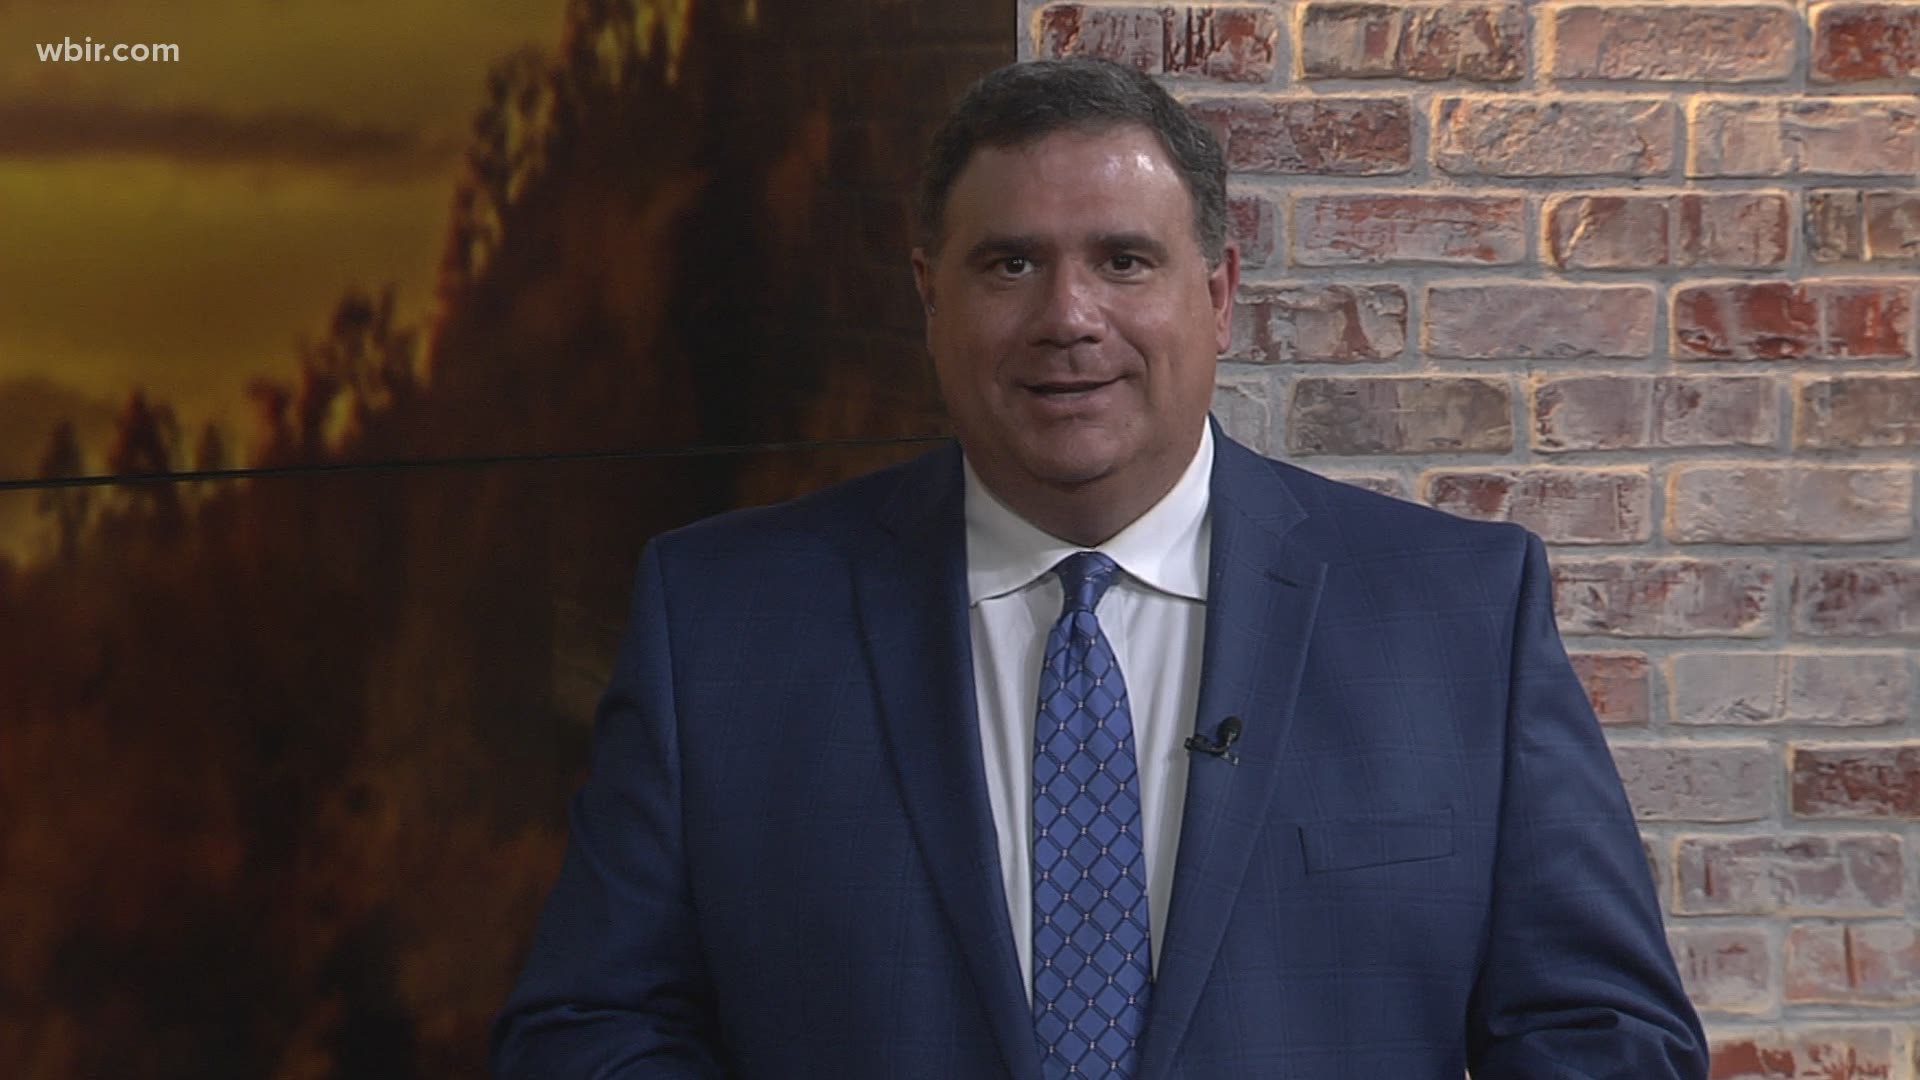 Russell has decided to take the next step in his professional career outside the television business. His last day with WBIR will be Friday, April 2.